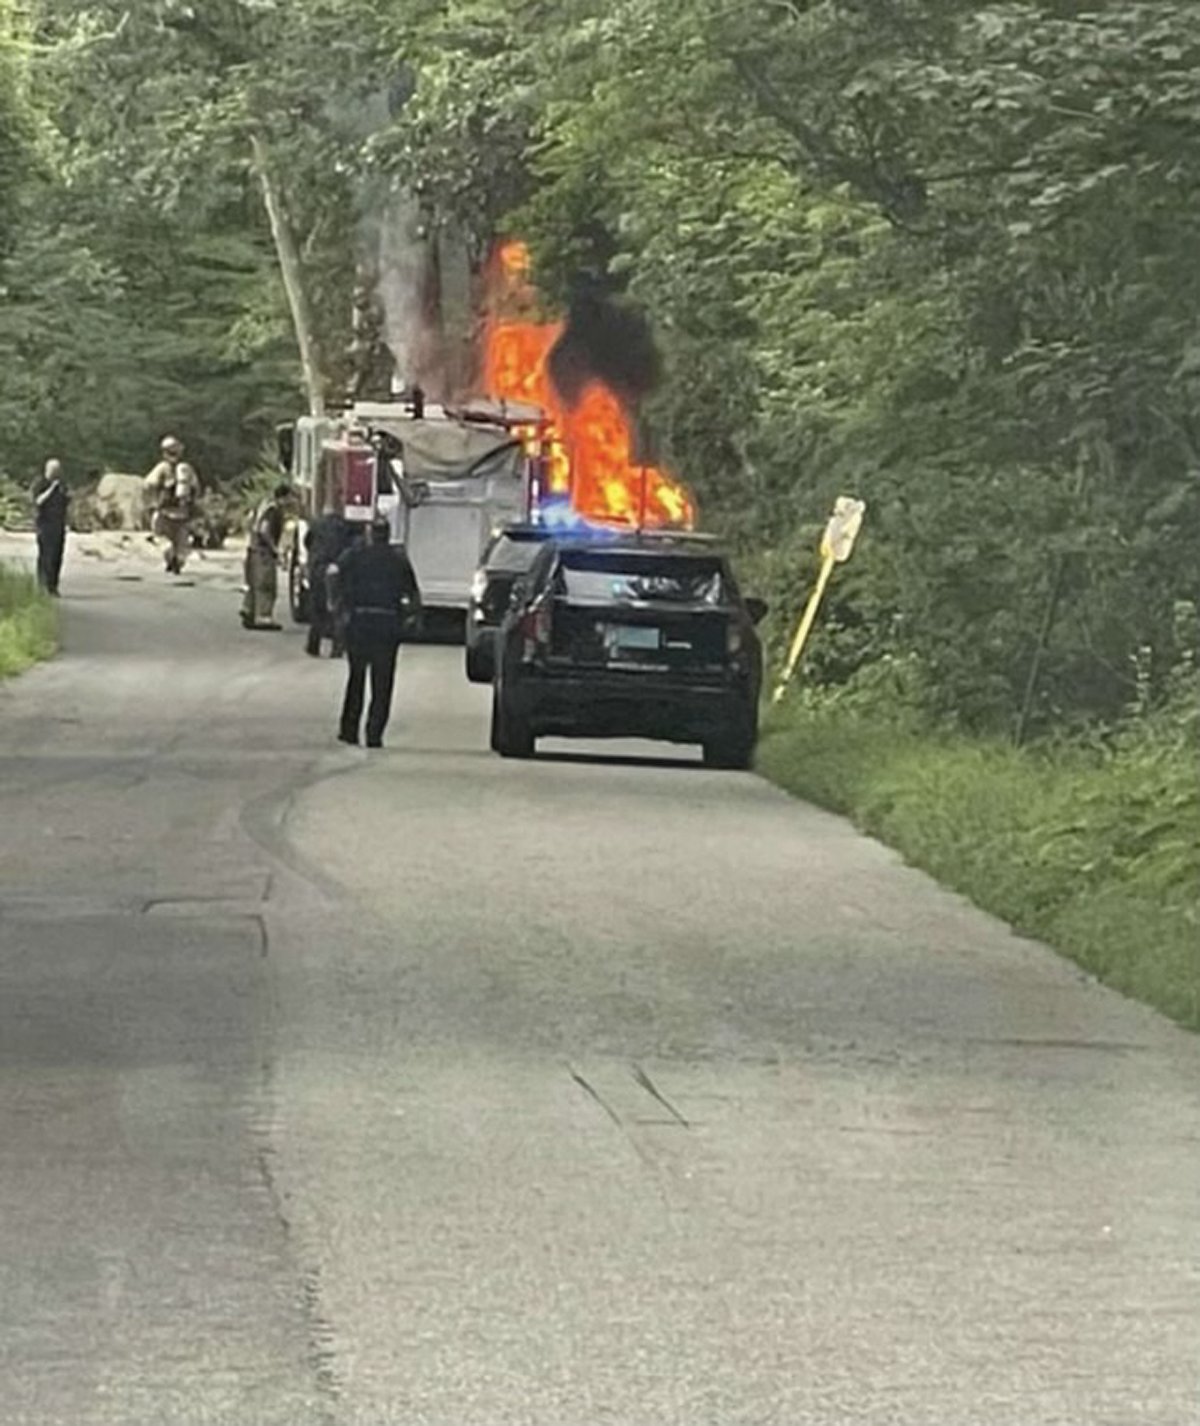 The driver killed in the fatal crash on Aug. 12 on Laten Knight Road has been positively identified by the Rhode Island State Medical Examiner’s Office as Kyle M. Segee, age 35, of 33 Cooper Road, Chepachet.